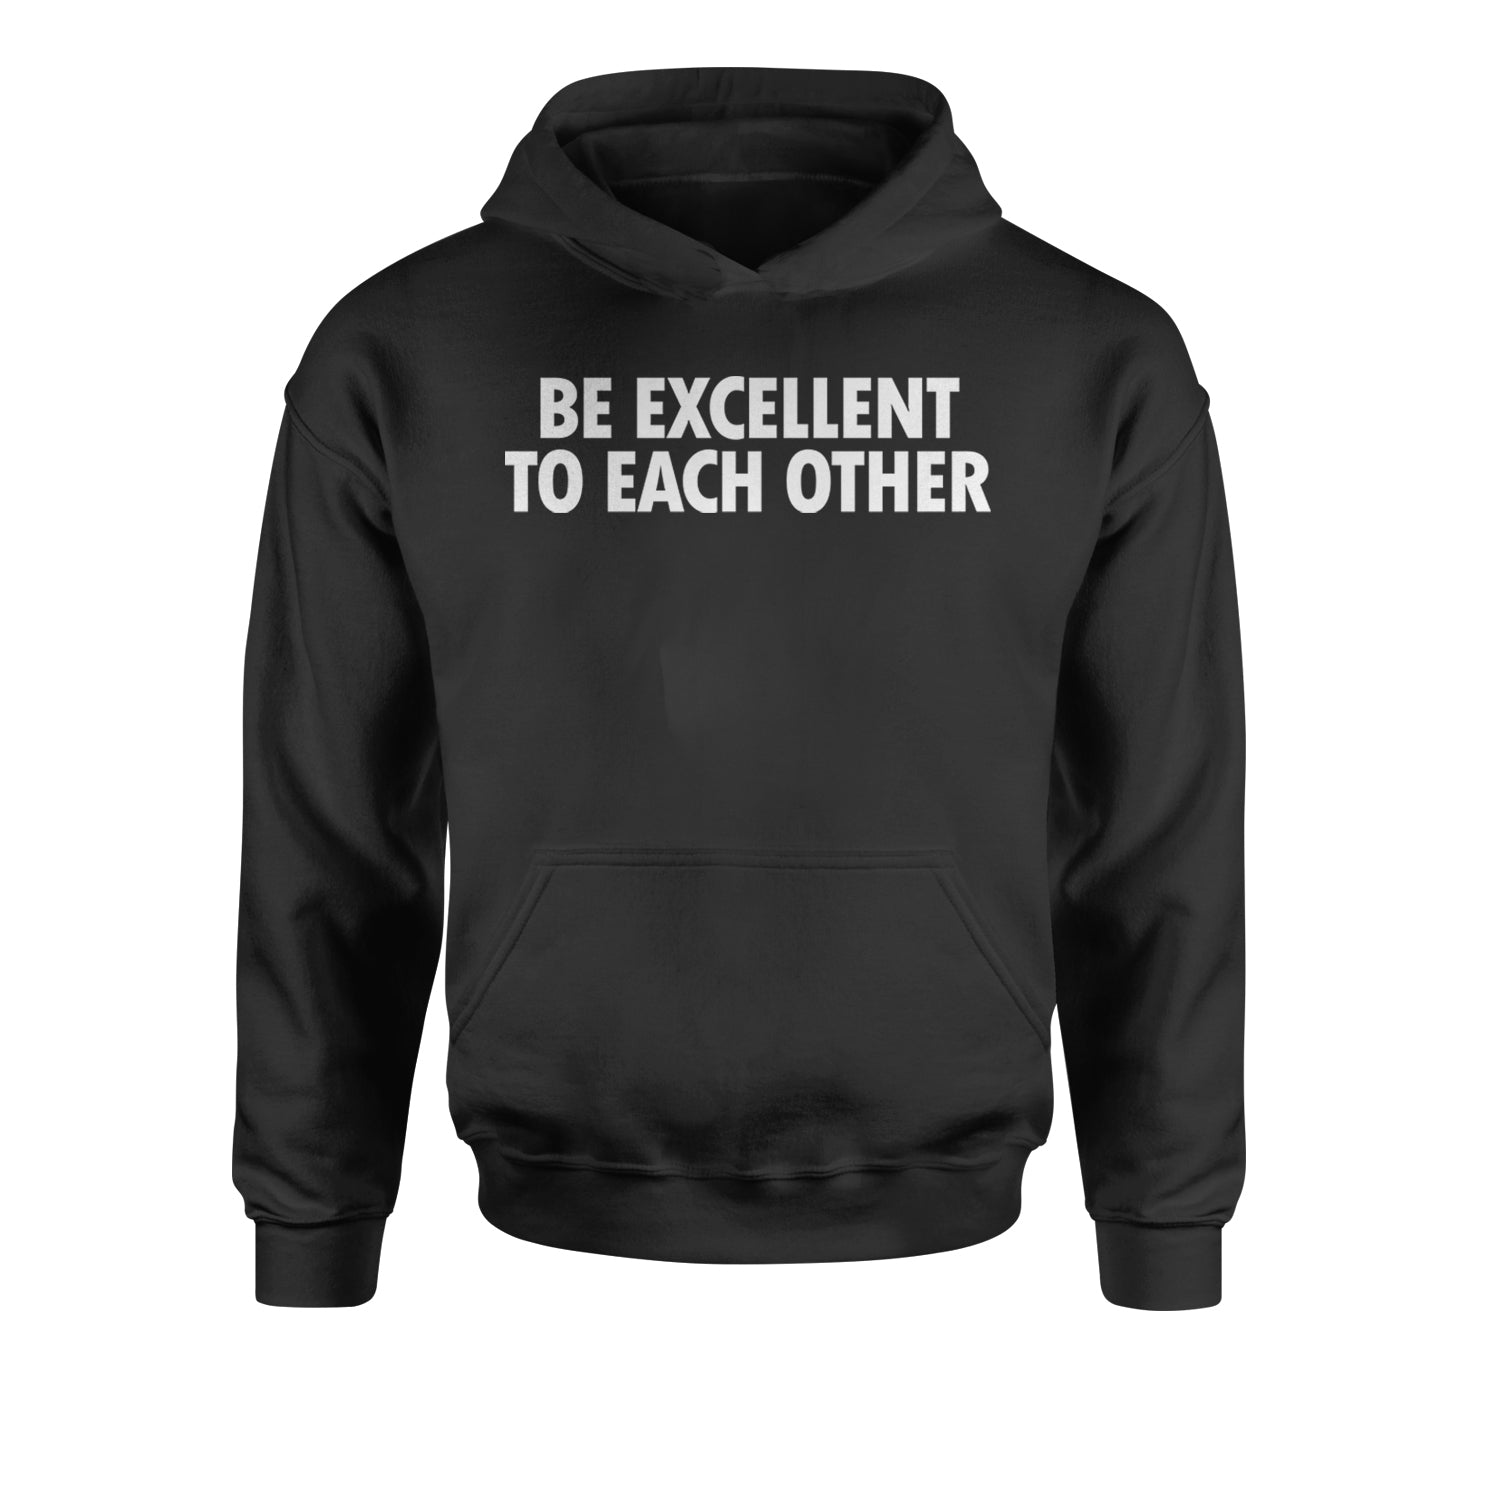 Be Excellent To Each Other Youth-Sized Hoodie